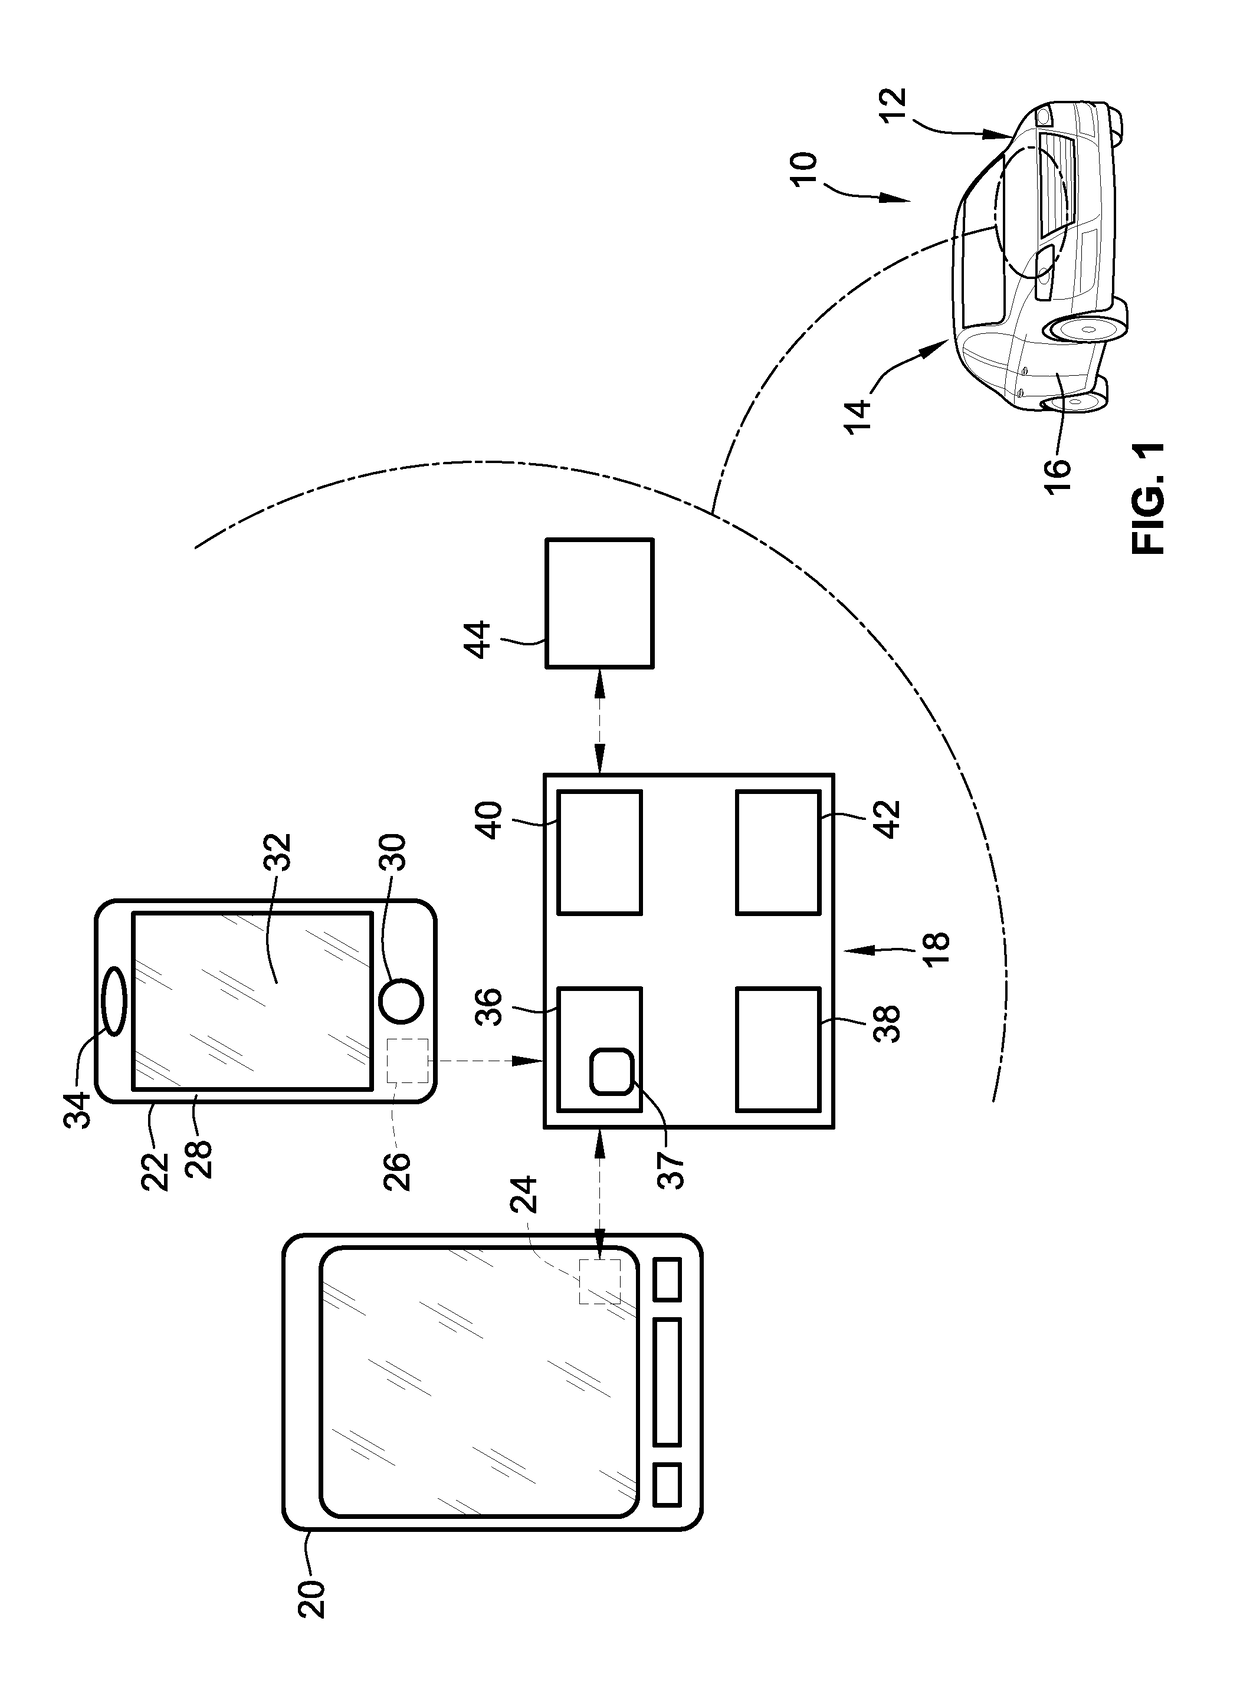 NFC-enabled systems, methods and devices for wireless vehicle communication